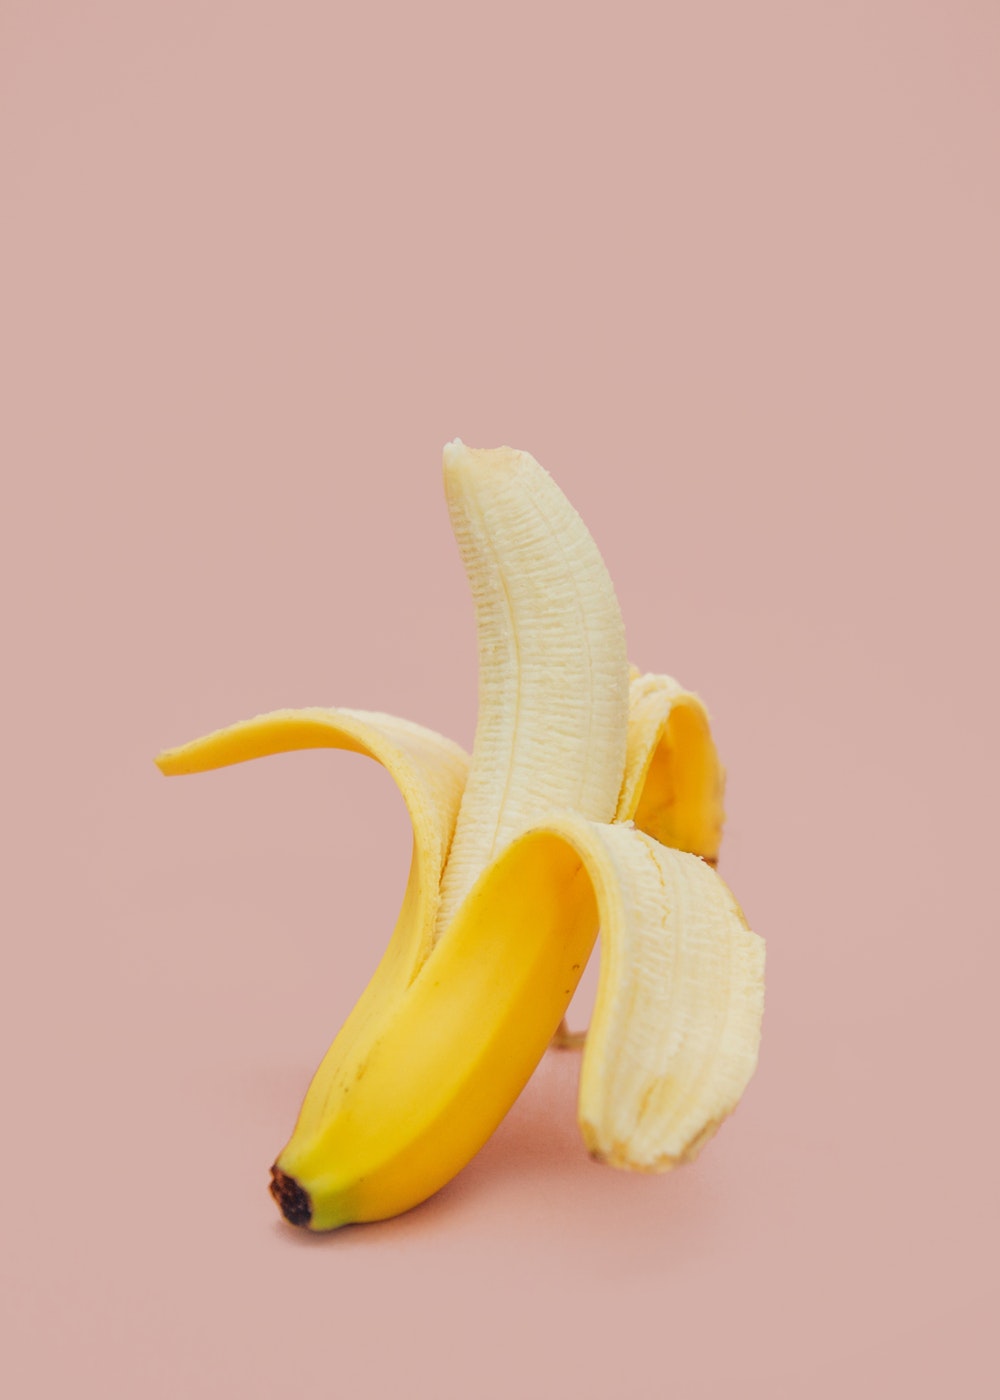 Banana Pictures Image